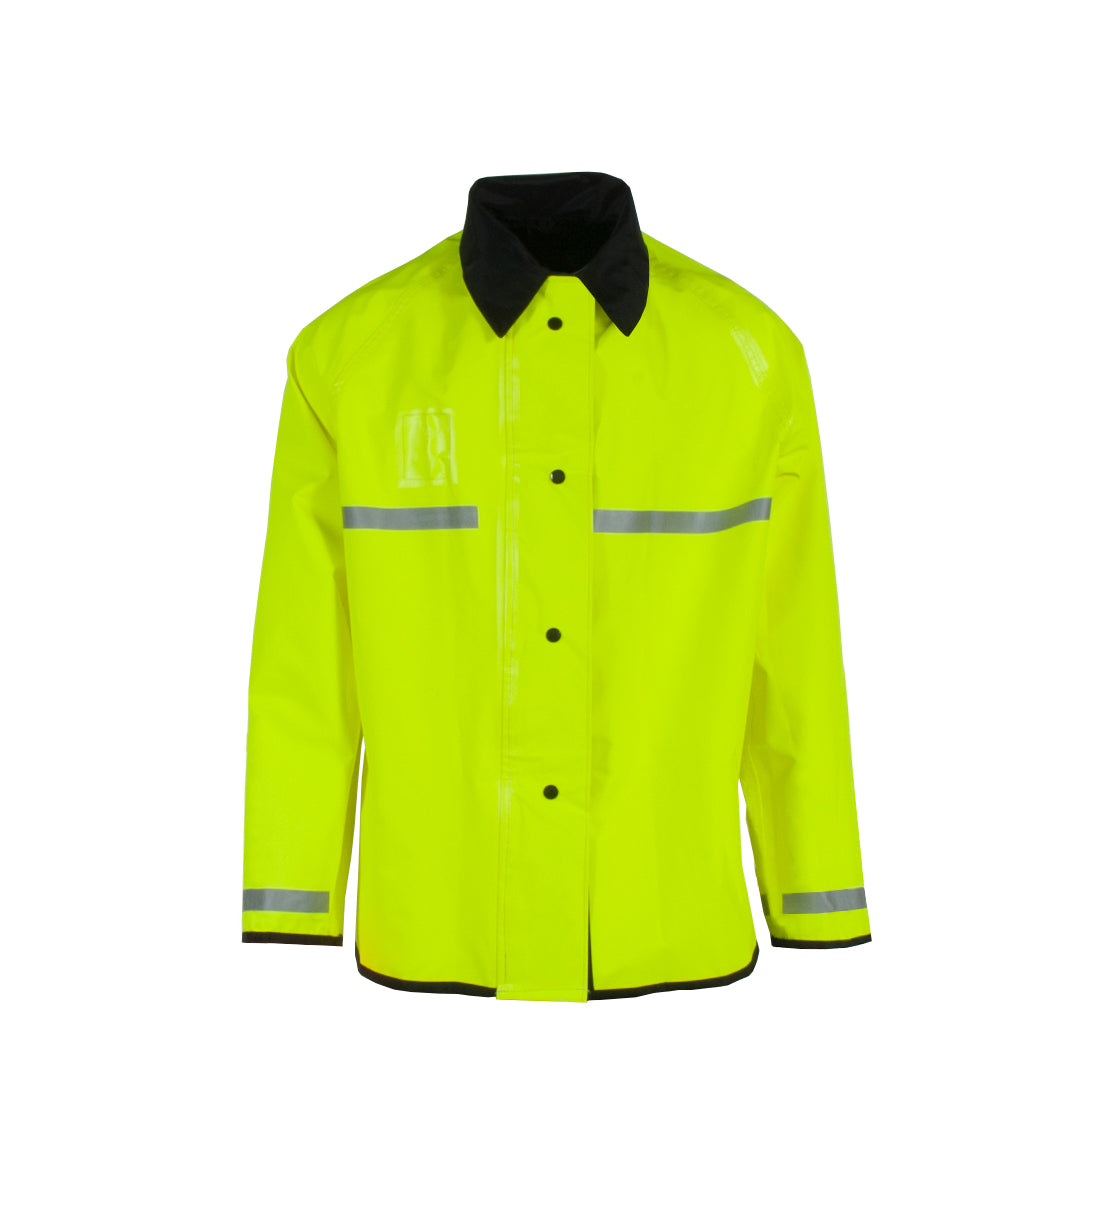 Neese 475RJH3M Duty Reversible Jacket with 3M Reflective Taping